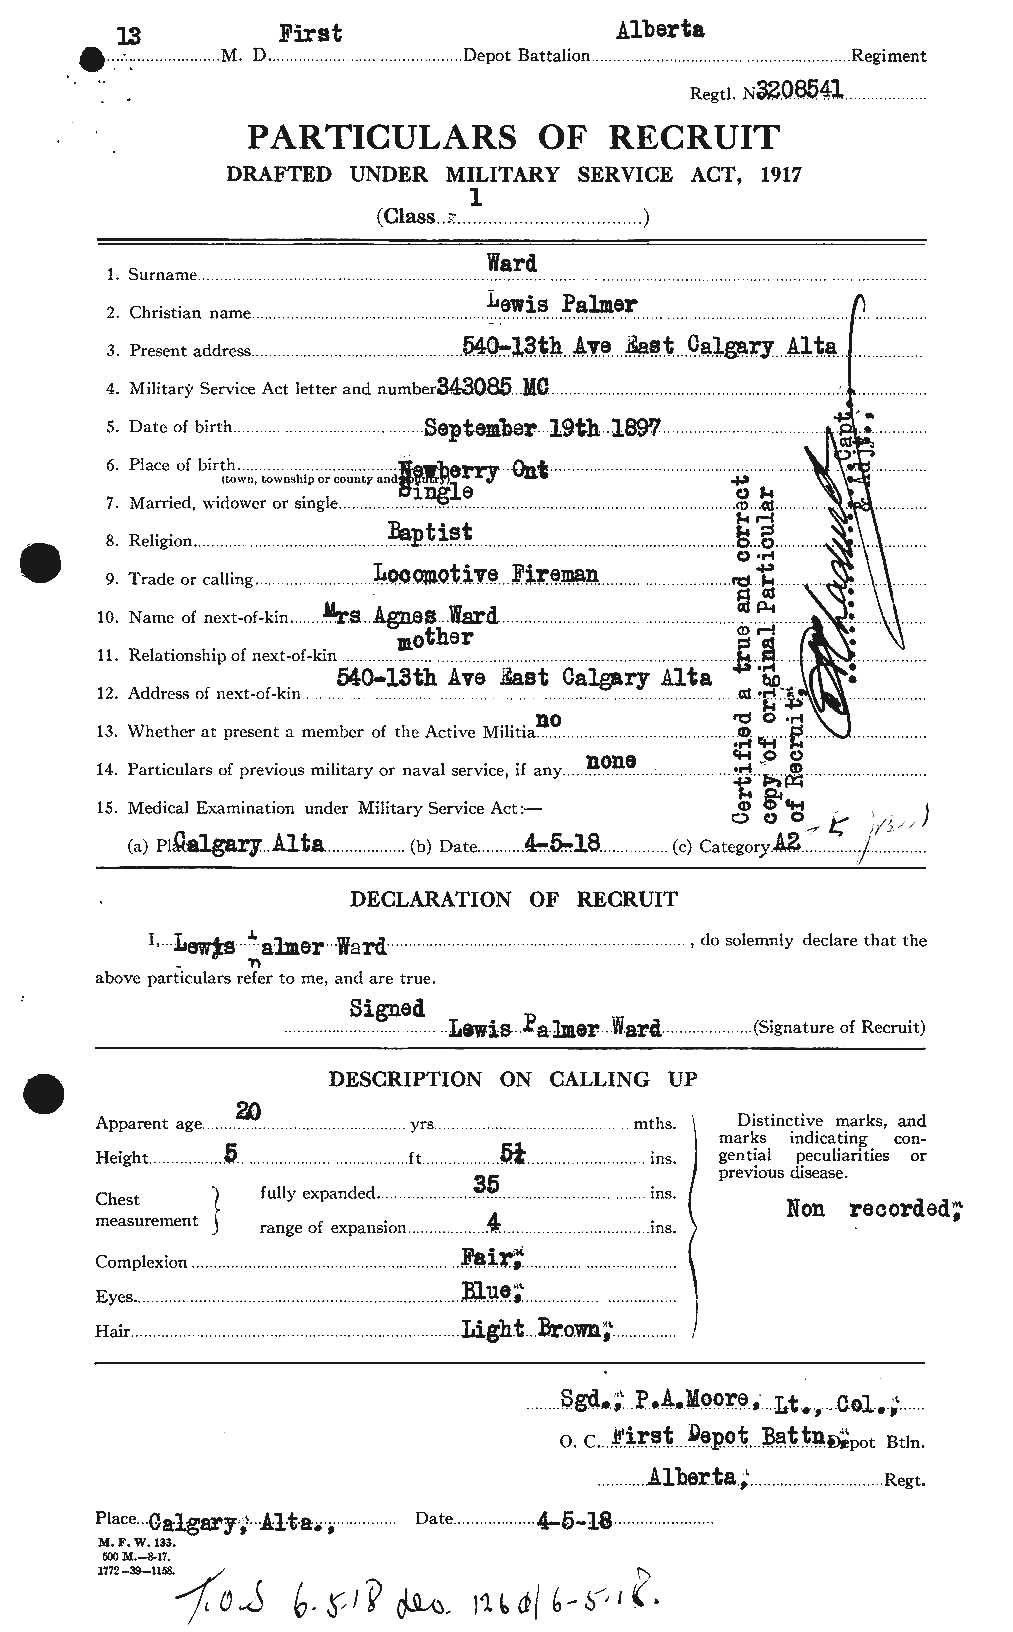 Personnel Records of the First World War - CEF 659592a